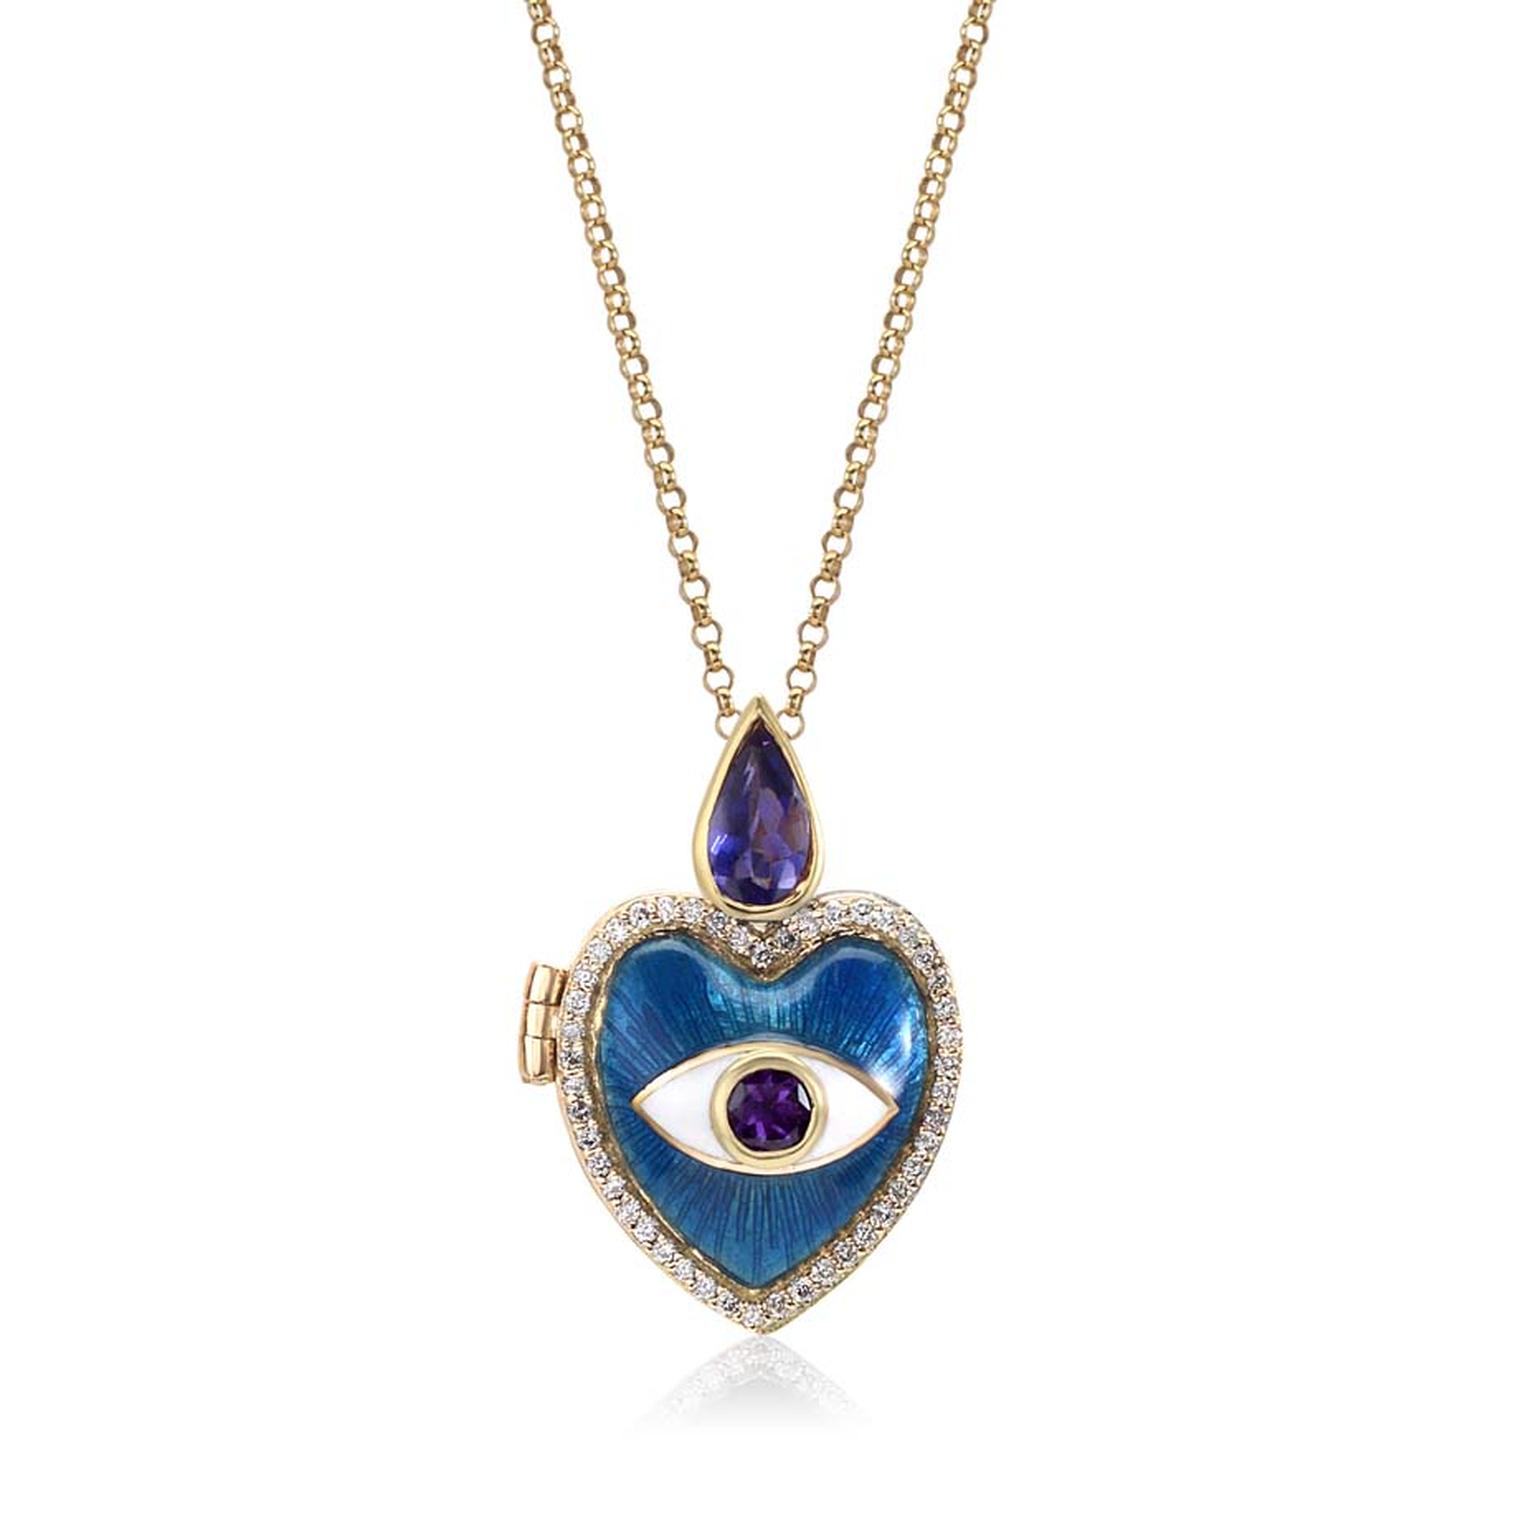 Holly Dyment heart locket with blue enamel, white diamonds, iolite and amethyst in gold ($3,380 from Broken English, New York).